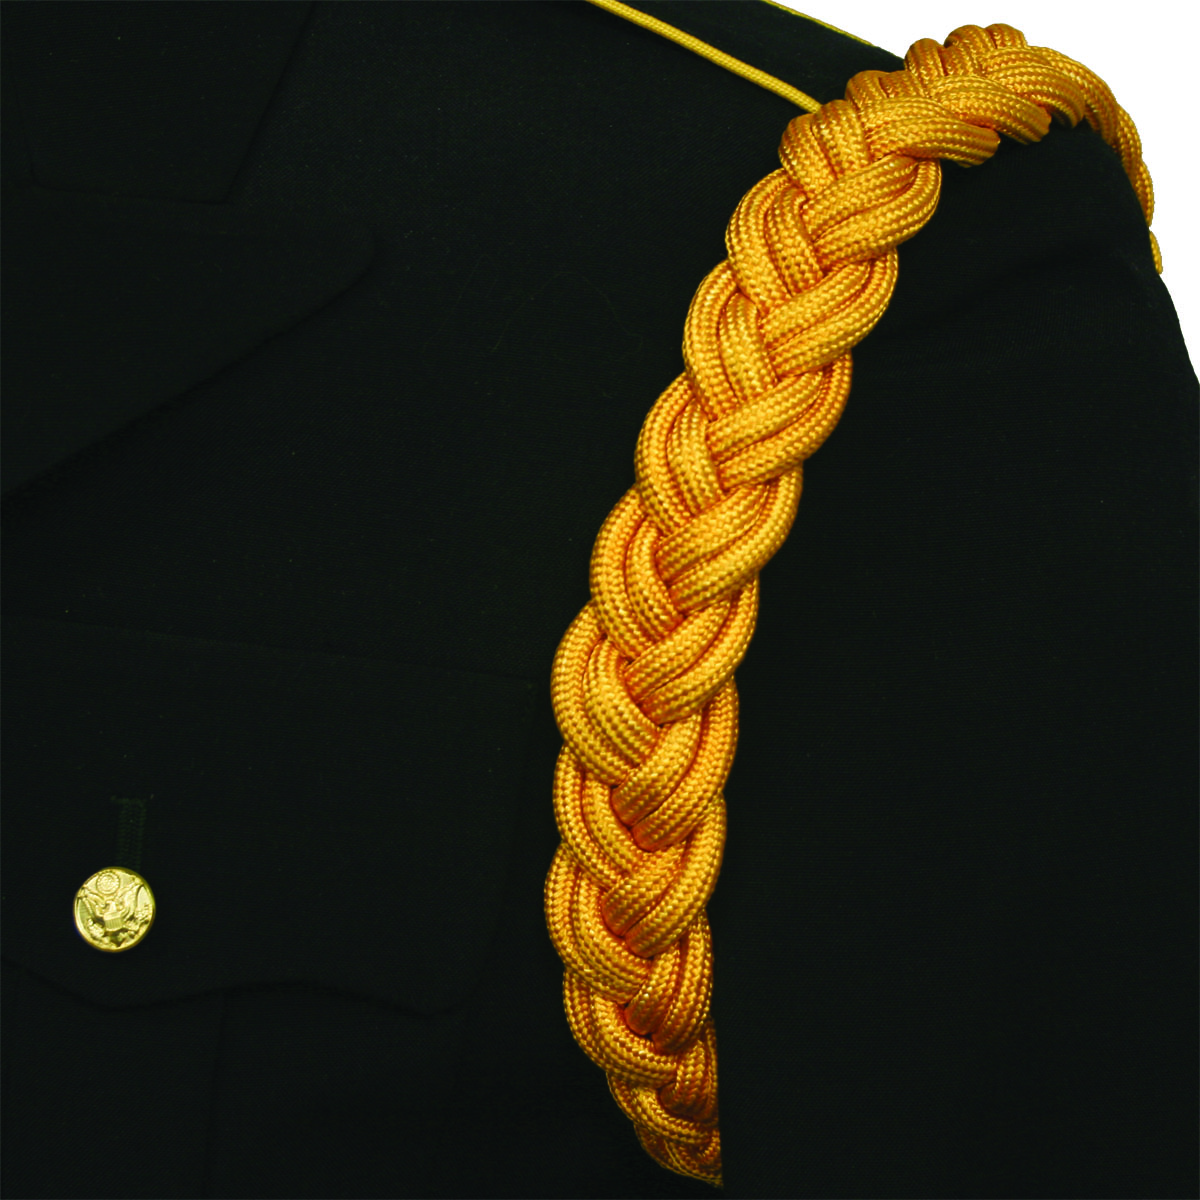 Army Shoulder Cords Meaning - Army Military